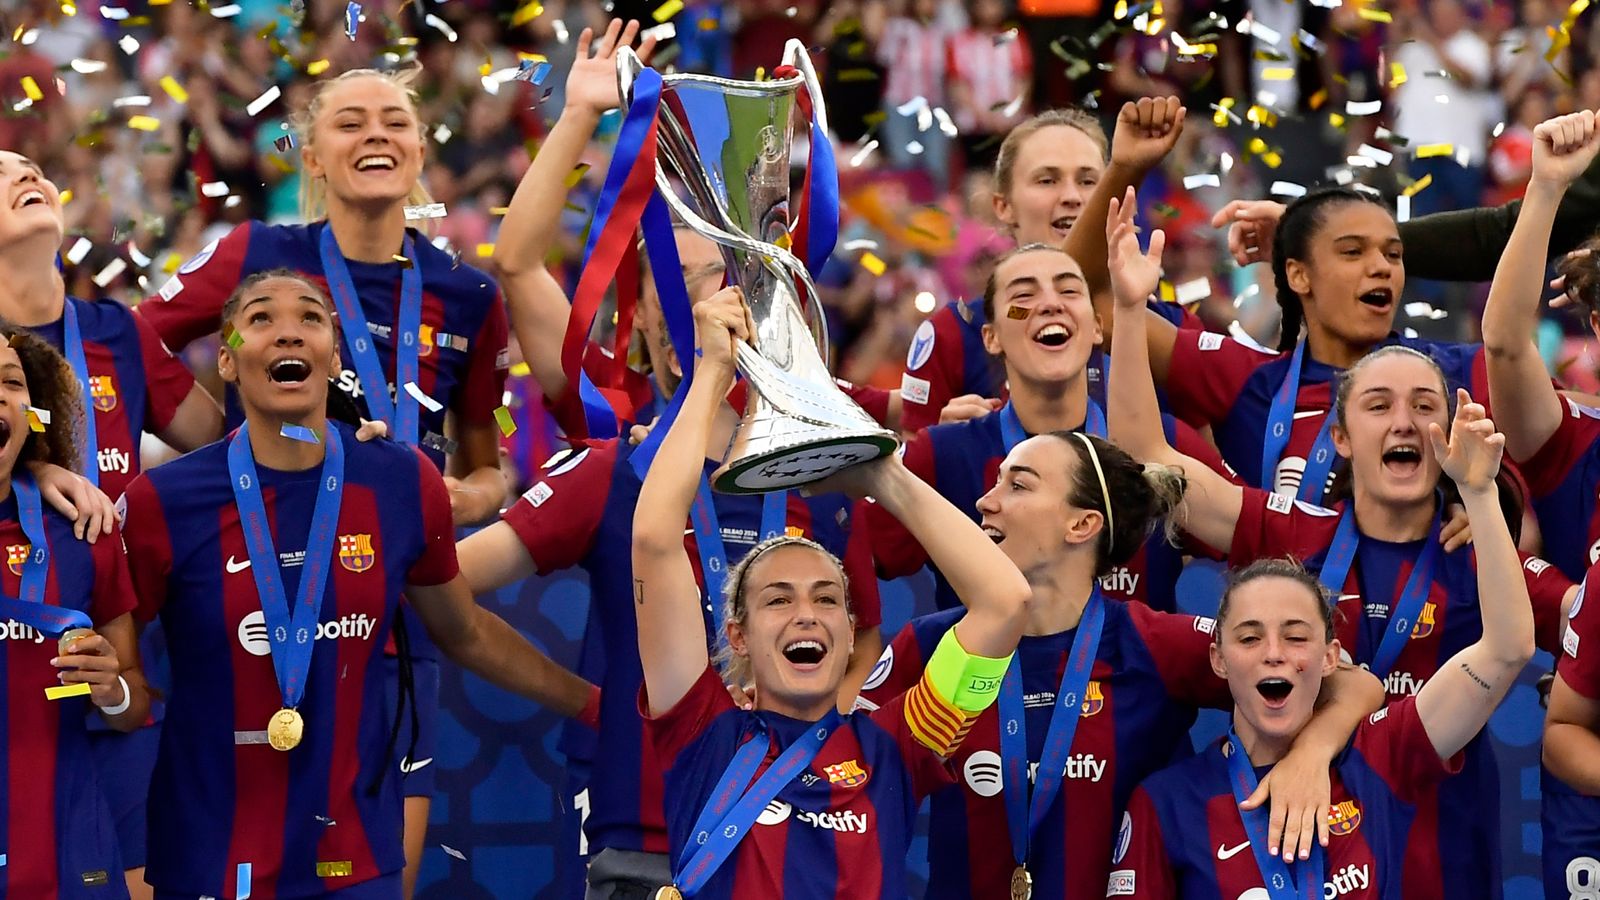 Barcelona ended their losing streak against Lyon to clinch a third Women